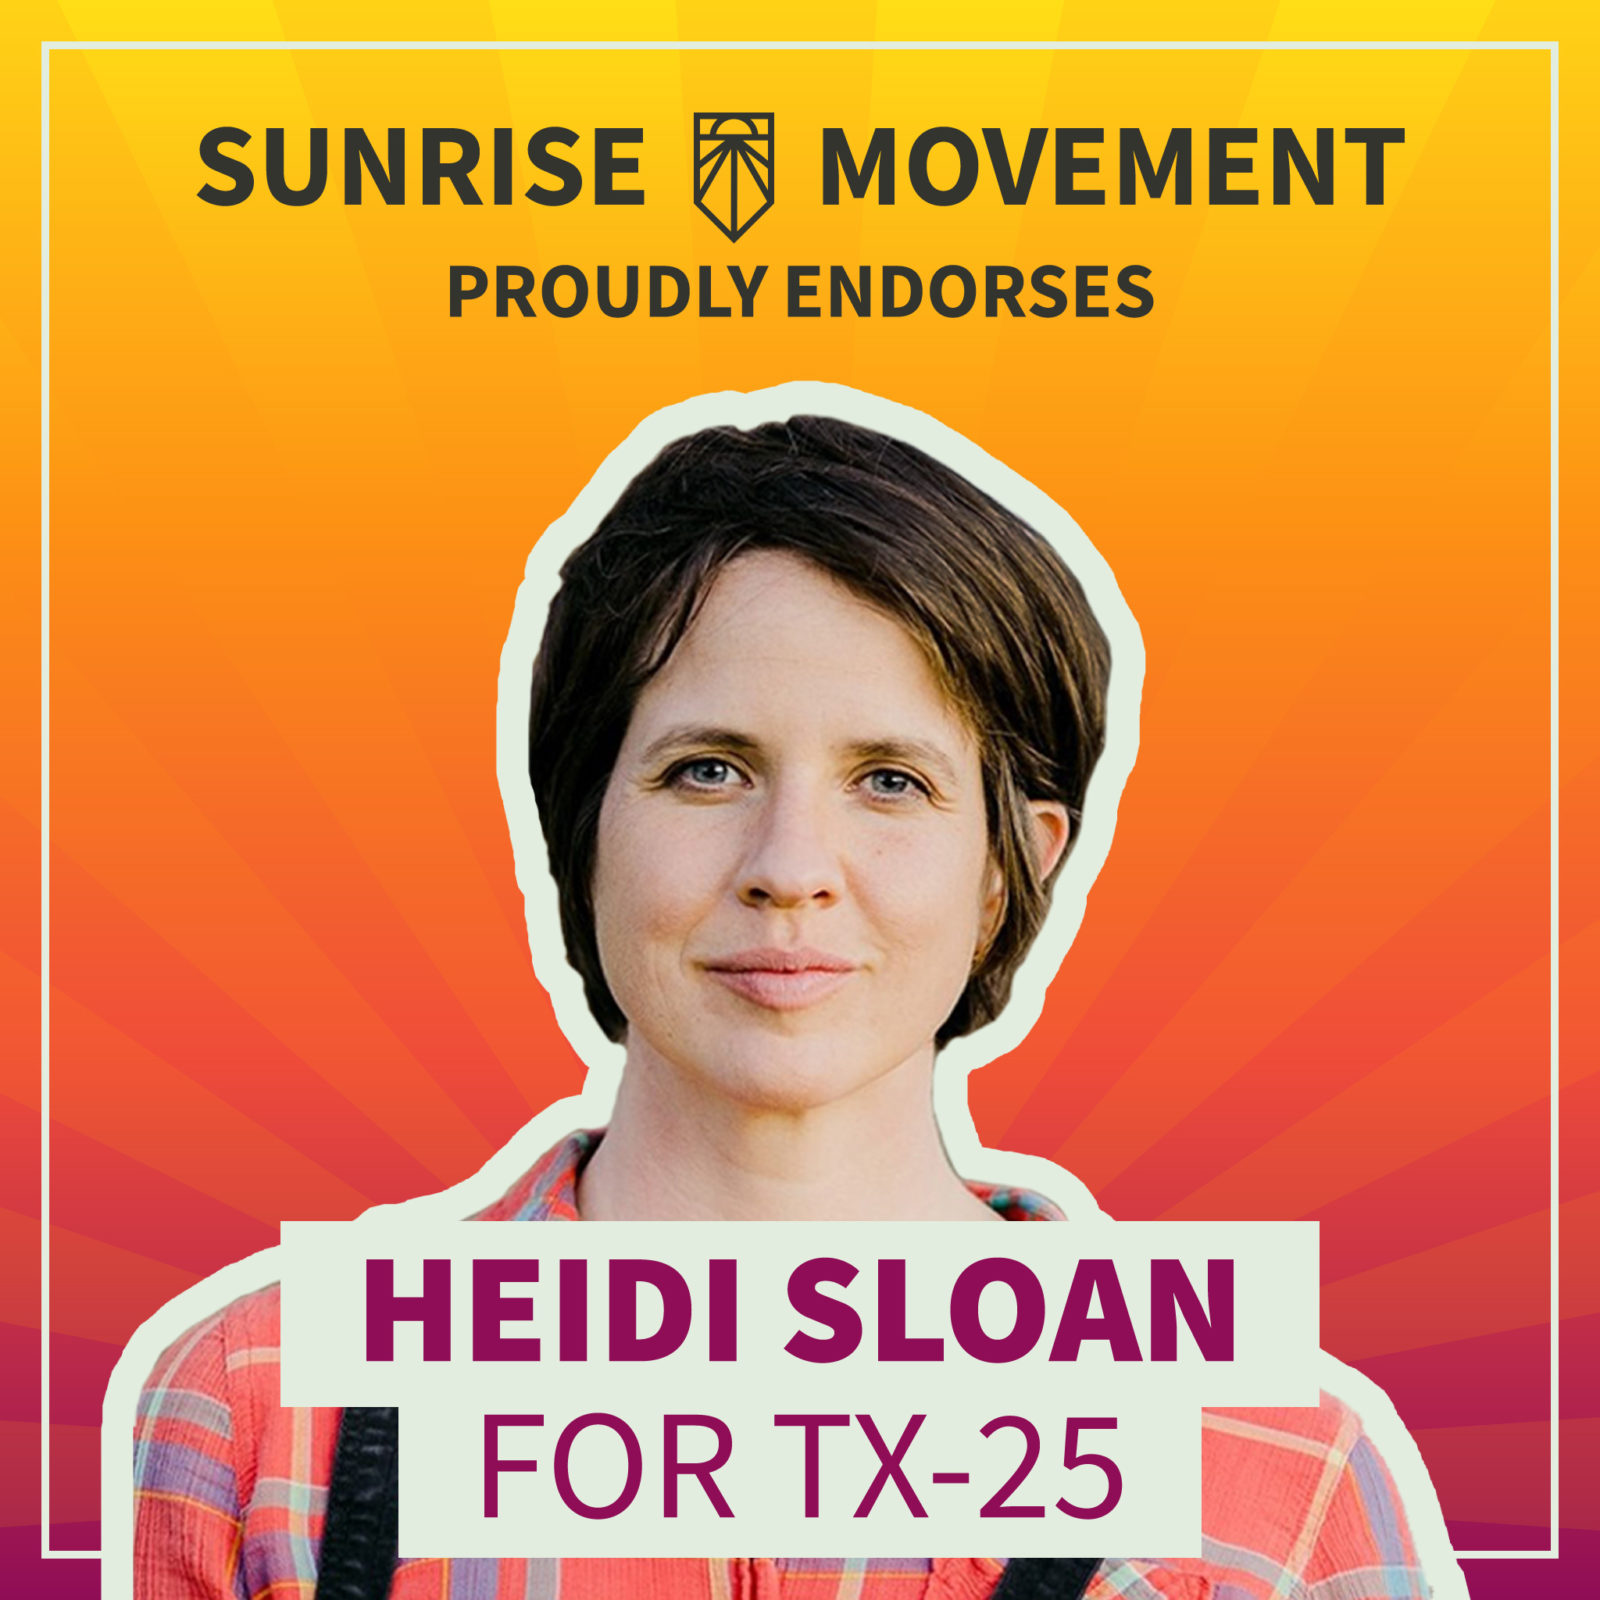 A photo of Heidi Sloan with text: Sunrise Movement proudly endorses Heidi Sloan for TX-25